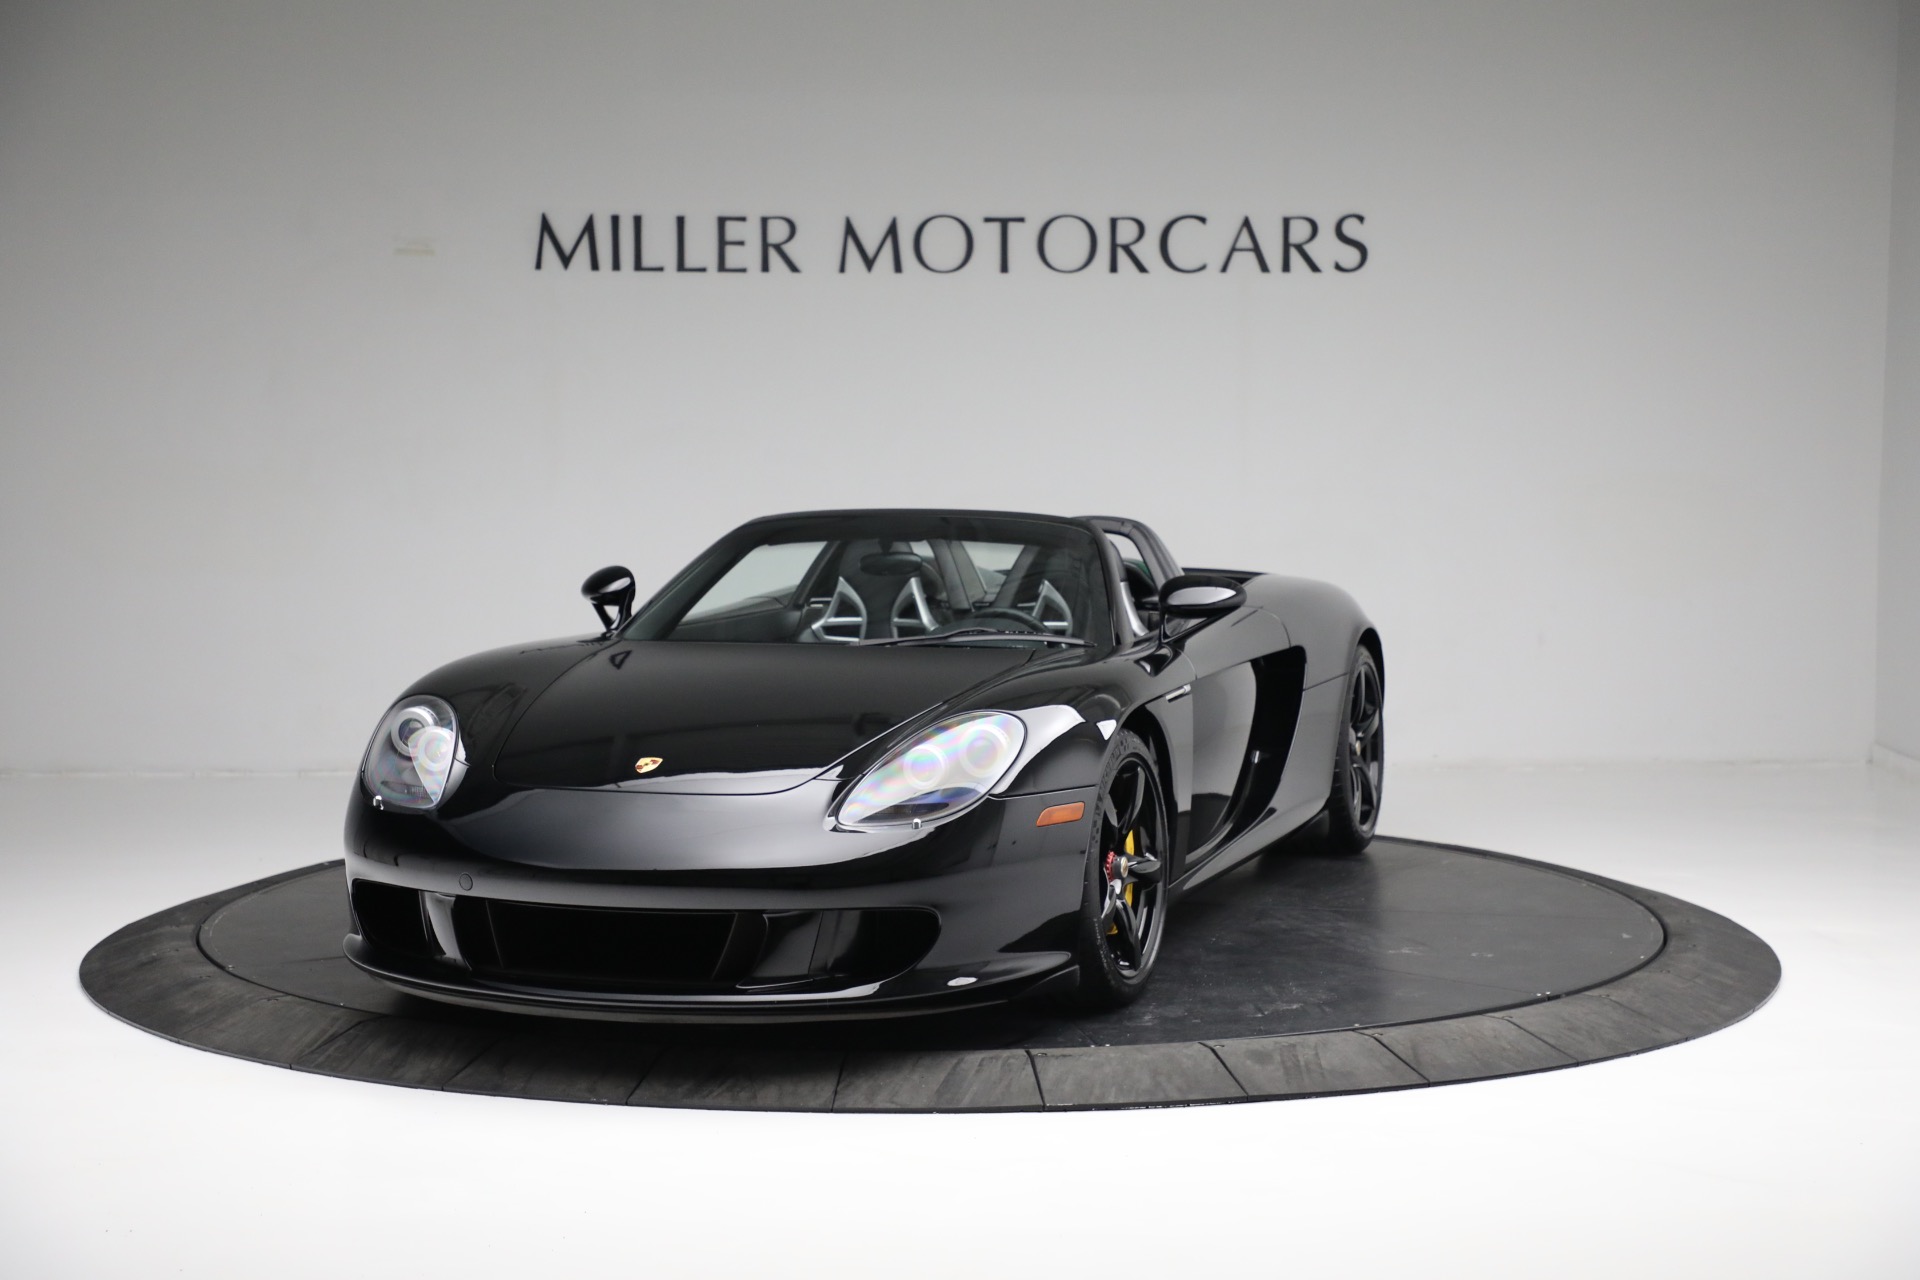 Used 2005 Porsche Carrera GT for sale $1,400,000 at Aston Martin of Greenwich in Greenwich CT 06830 1